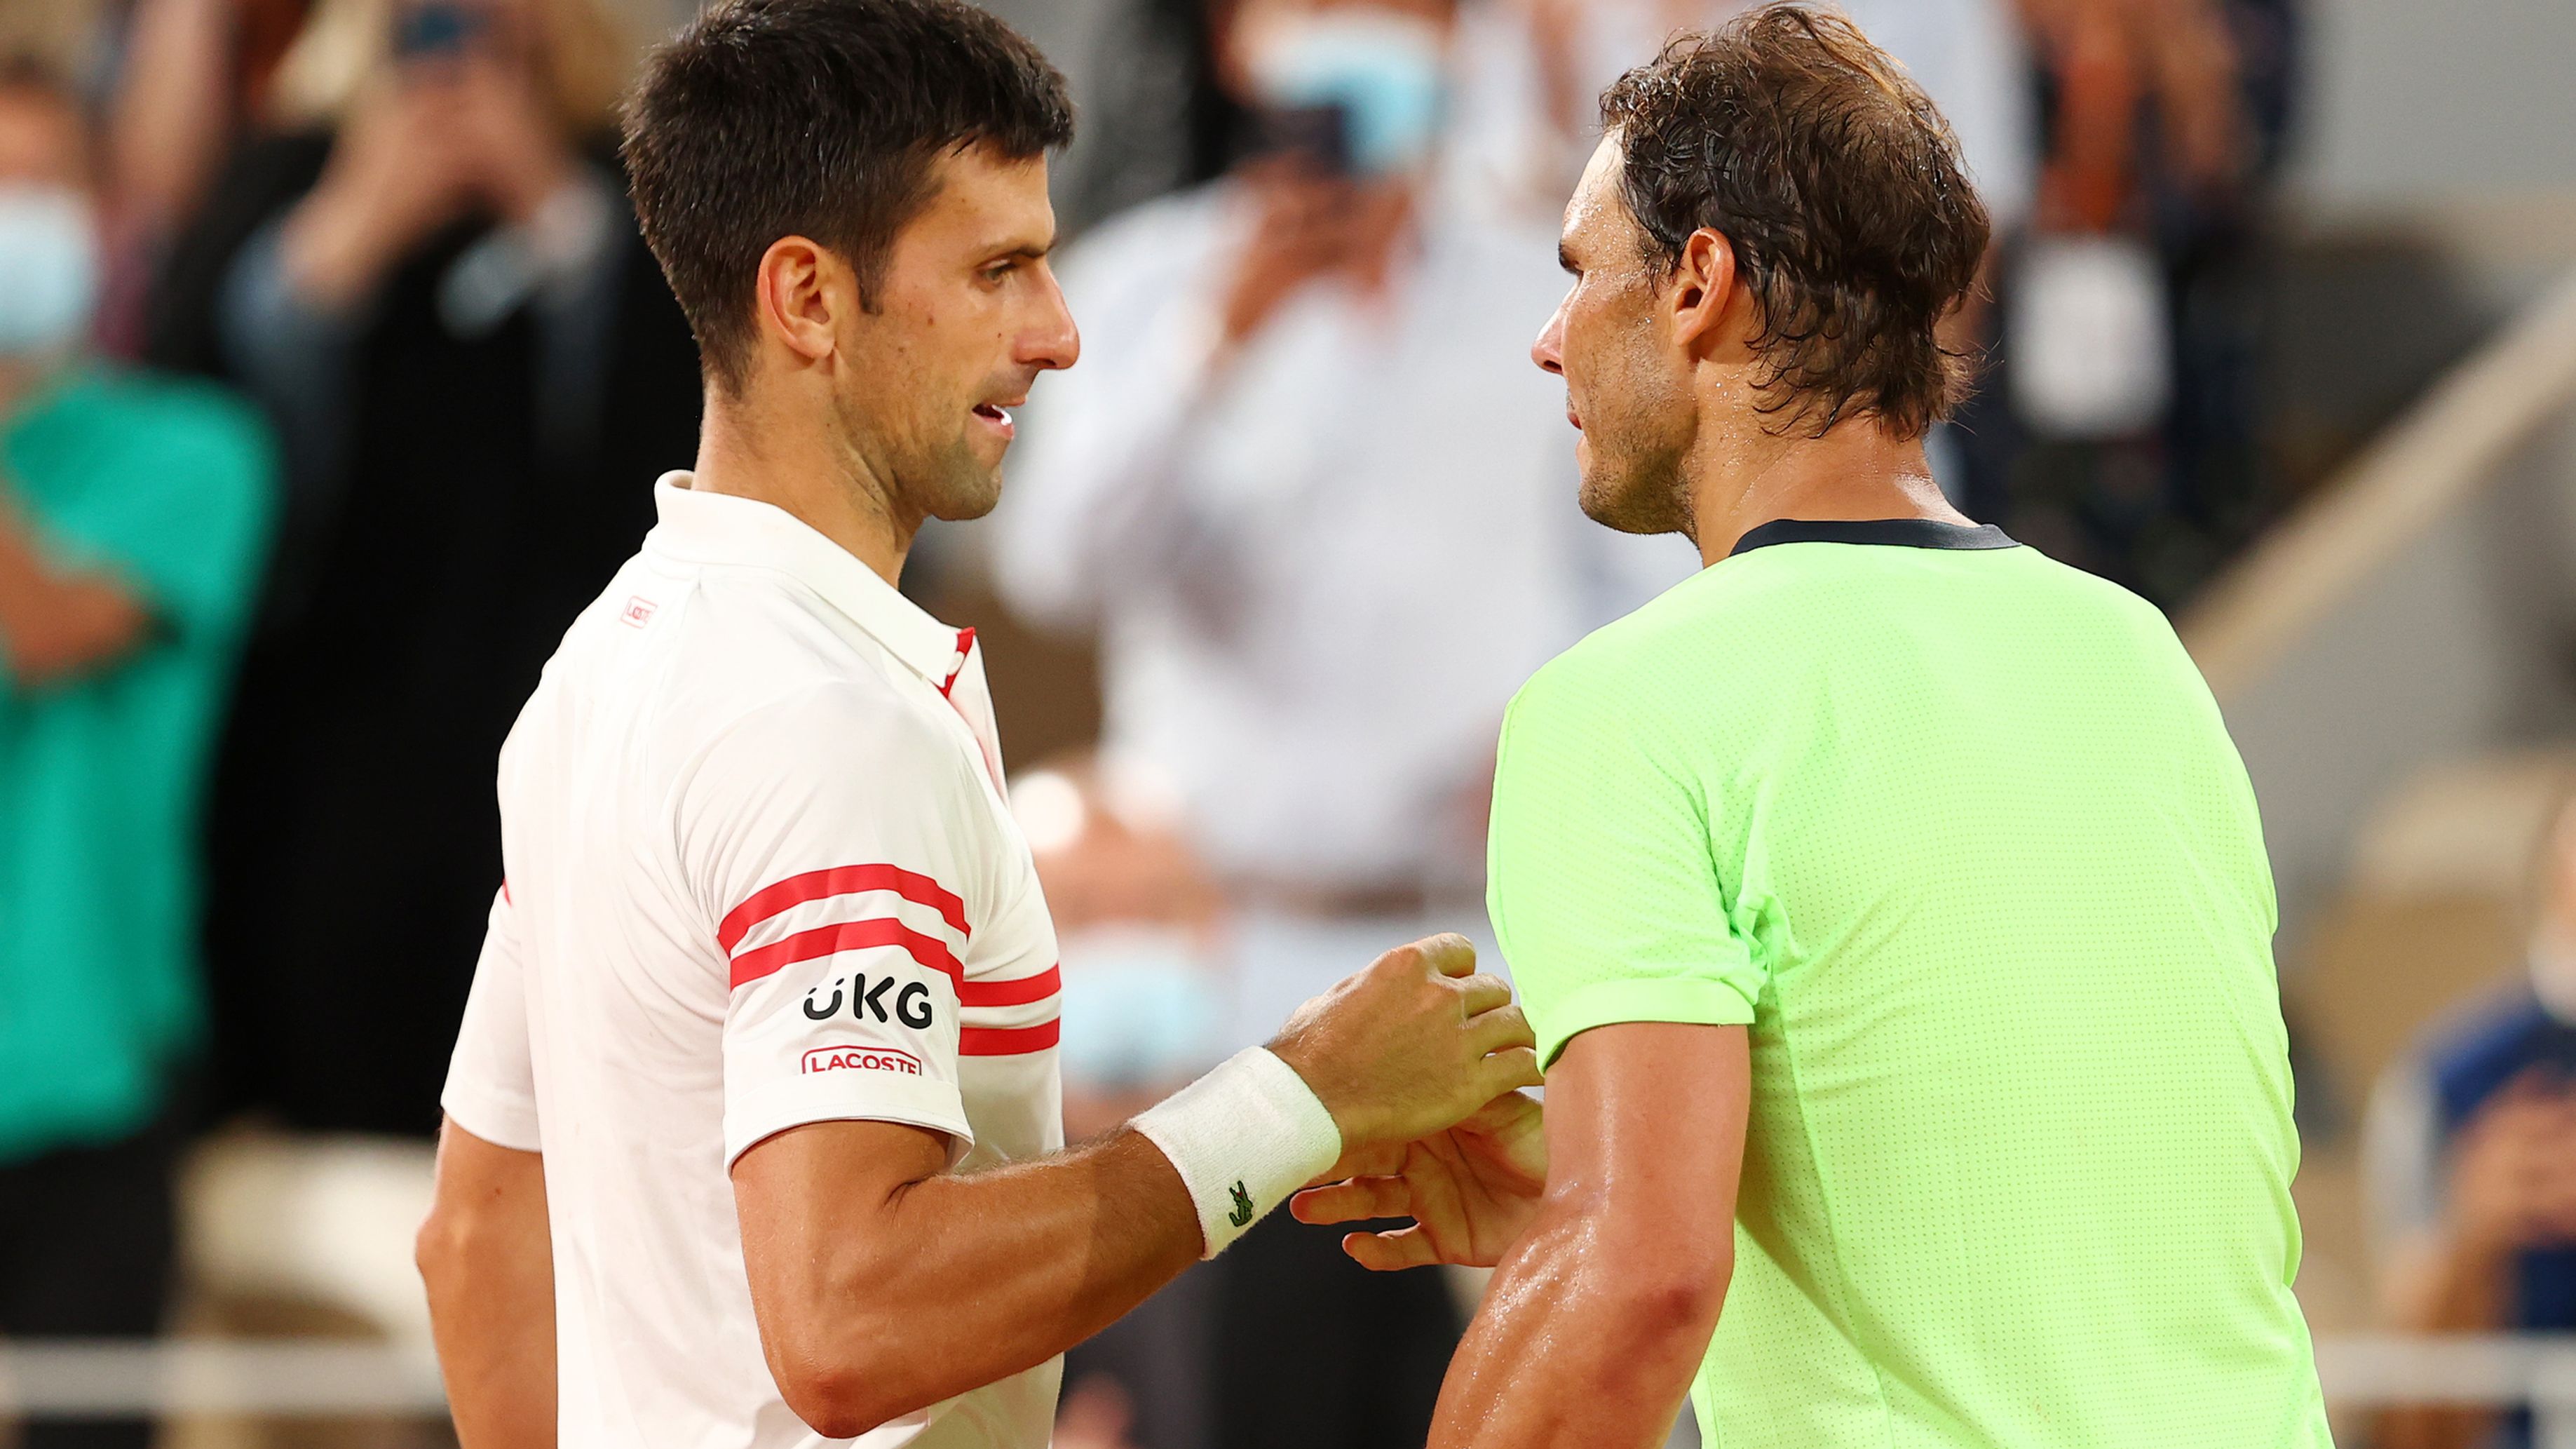 Tennis titans Rafael Nadal, Novak Djokovic prepare to clash for the 59th - and possibly last - time